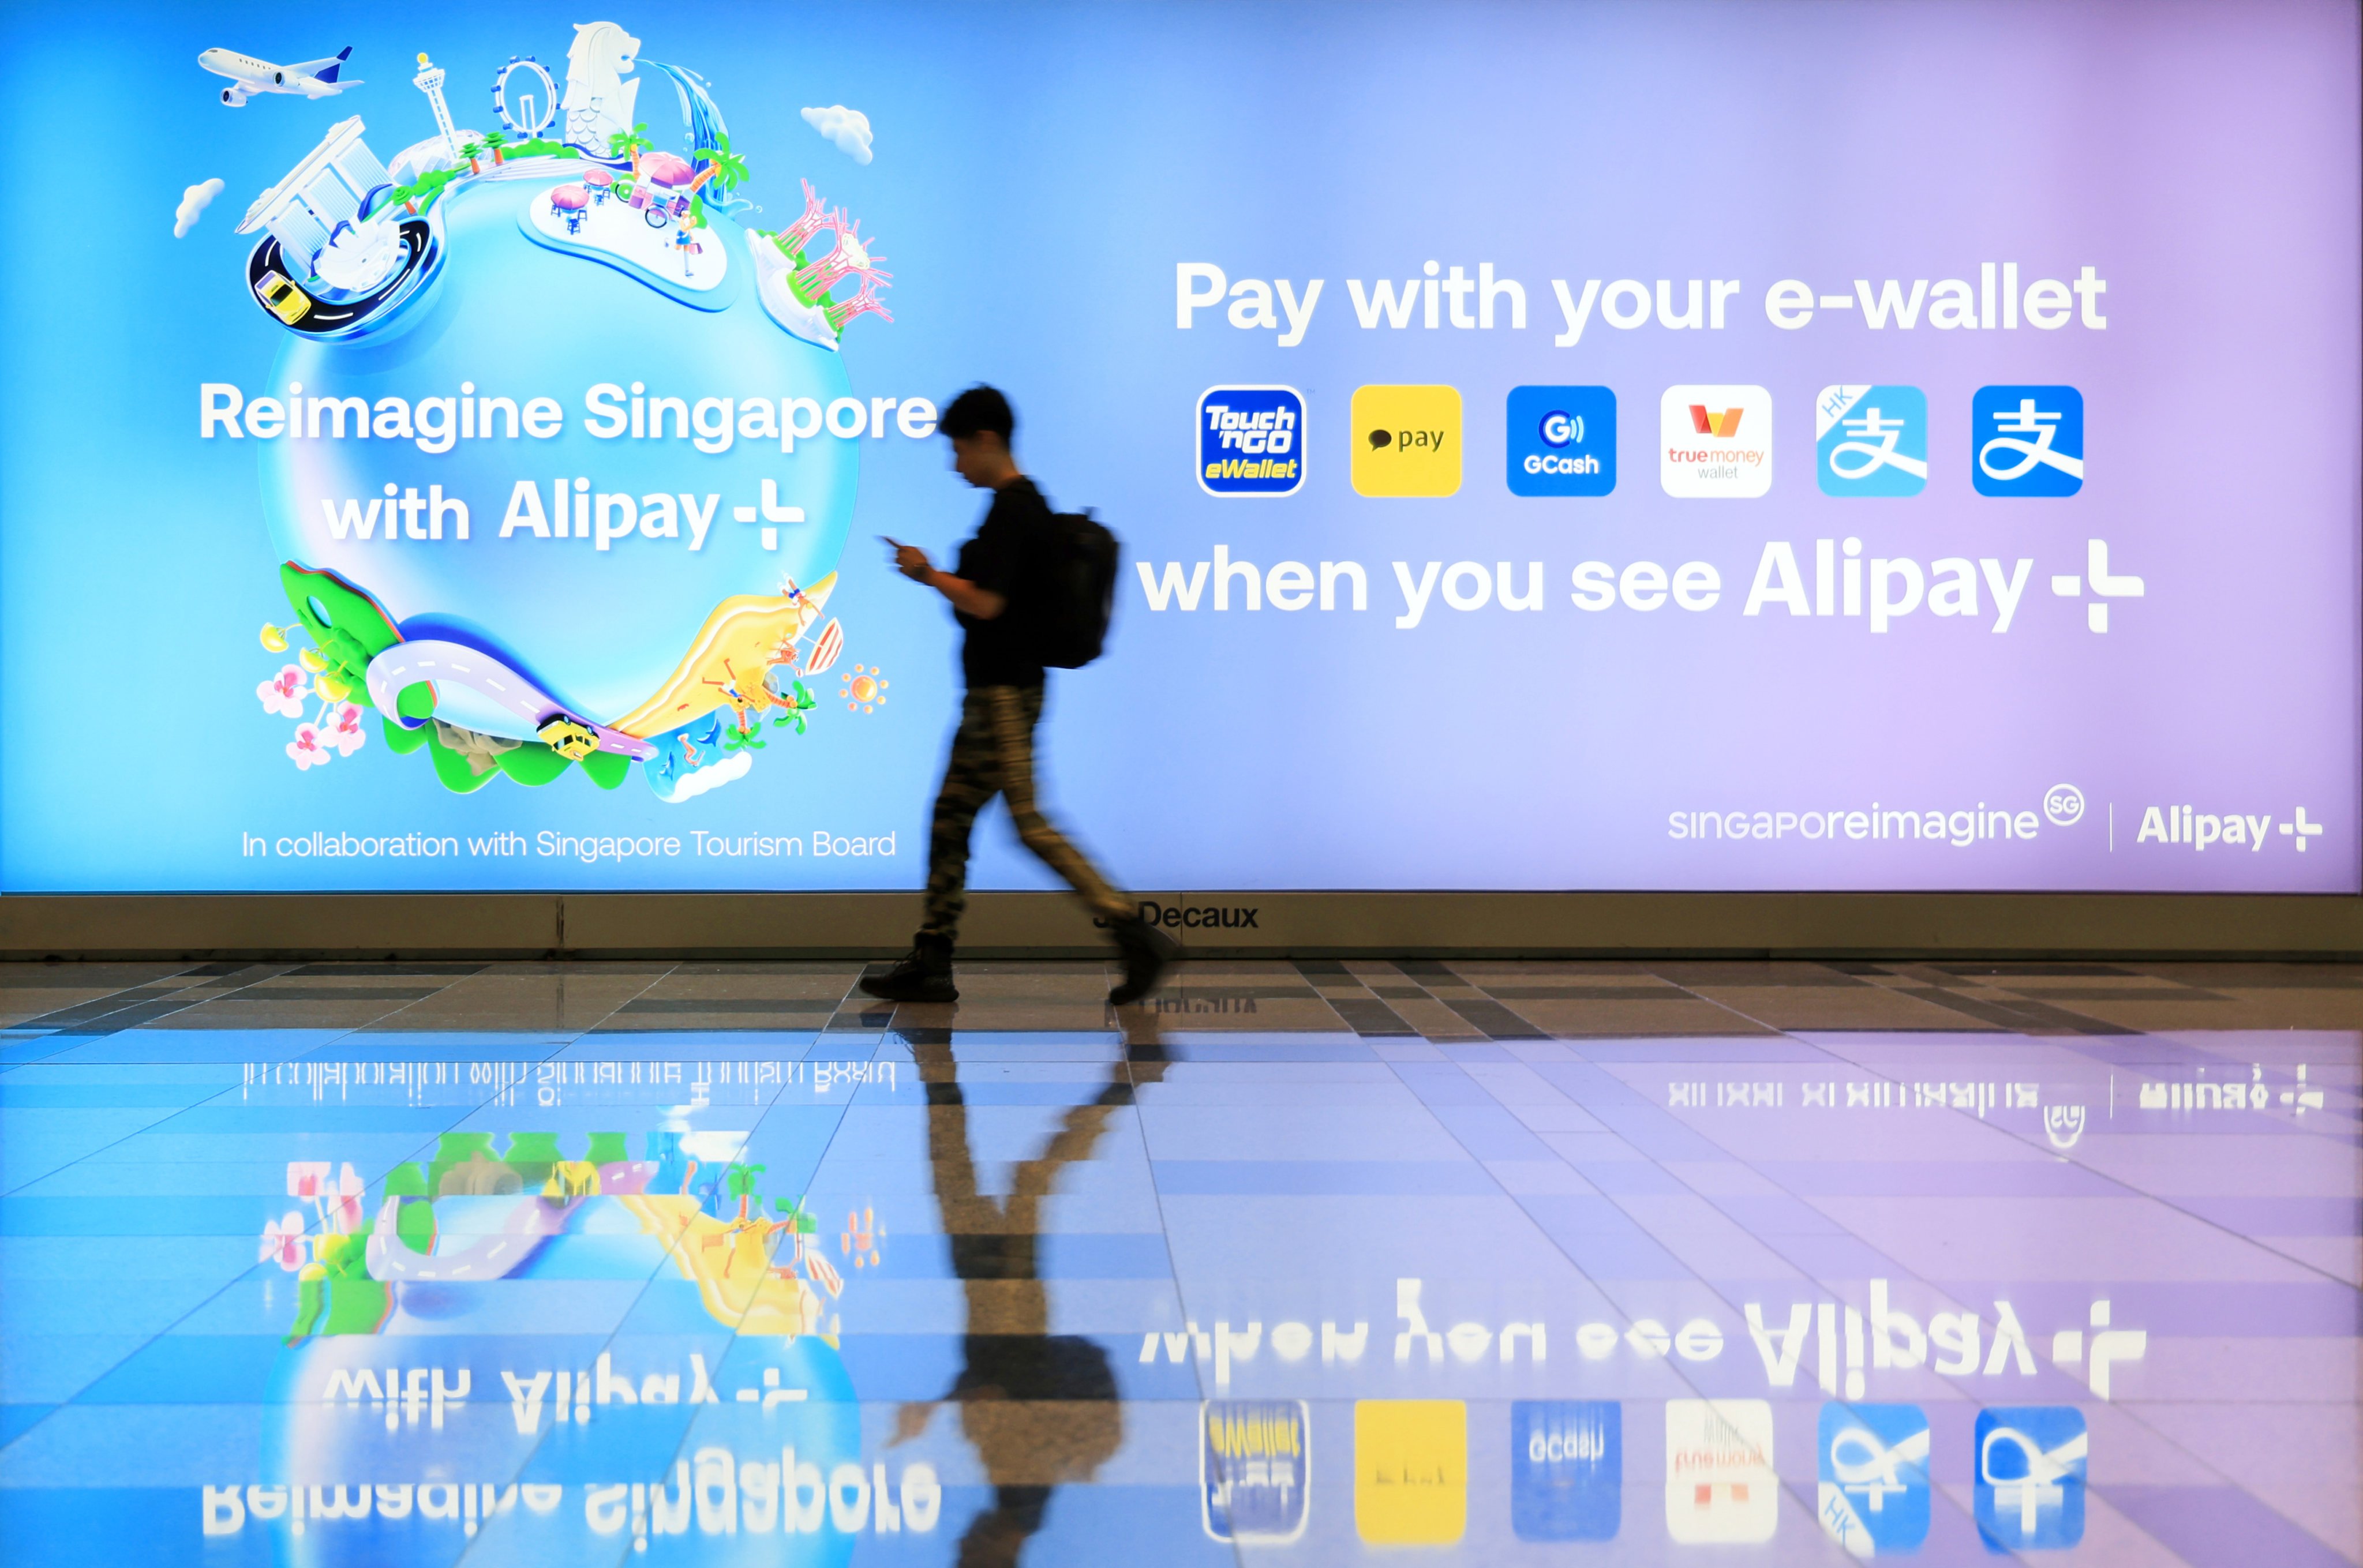 Singapore is among the Asian nations that offers travellers the ability to continue making transactions using their existing e-wallets thanks to access to the digital payment solution Alipay+.